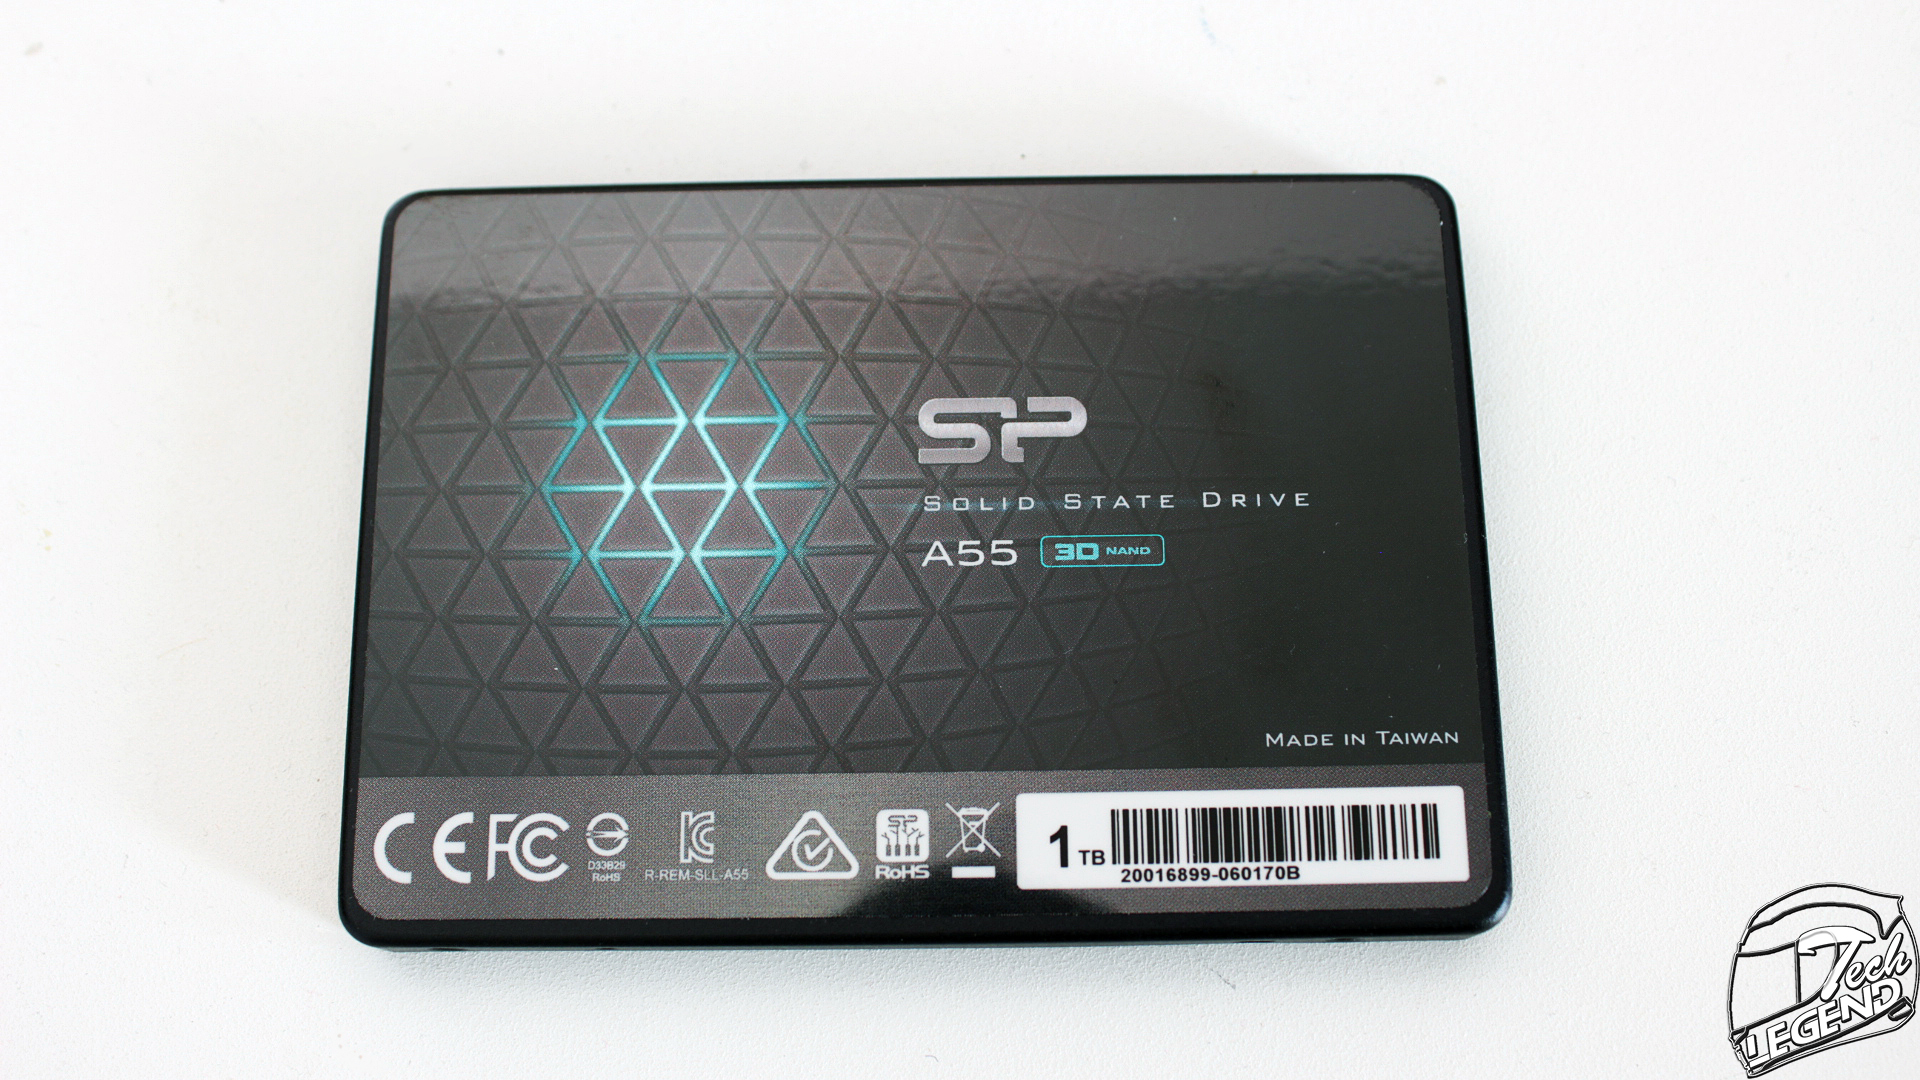 Silicon power a55. Silicon Power SSD 1tb. Silicon Power SSD a55 1tb. Silicon Power Slim s55 480gb контроллер. 1. Silicon Power ud90 1tb - 1 шт - $36.00.